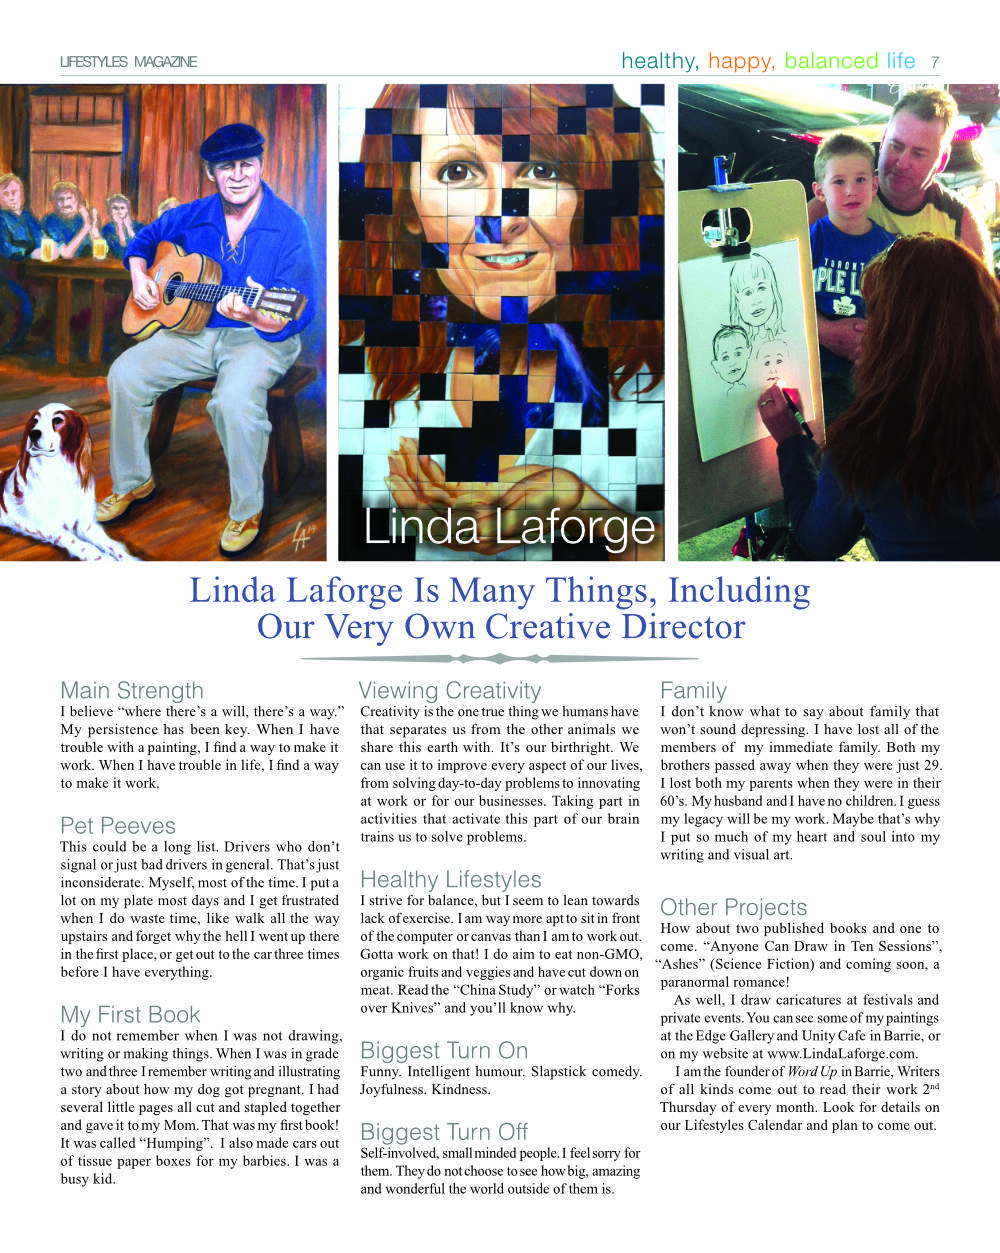 Featured article on artist Linda Laforge in Lifestyles Magazine in Ontario Canada